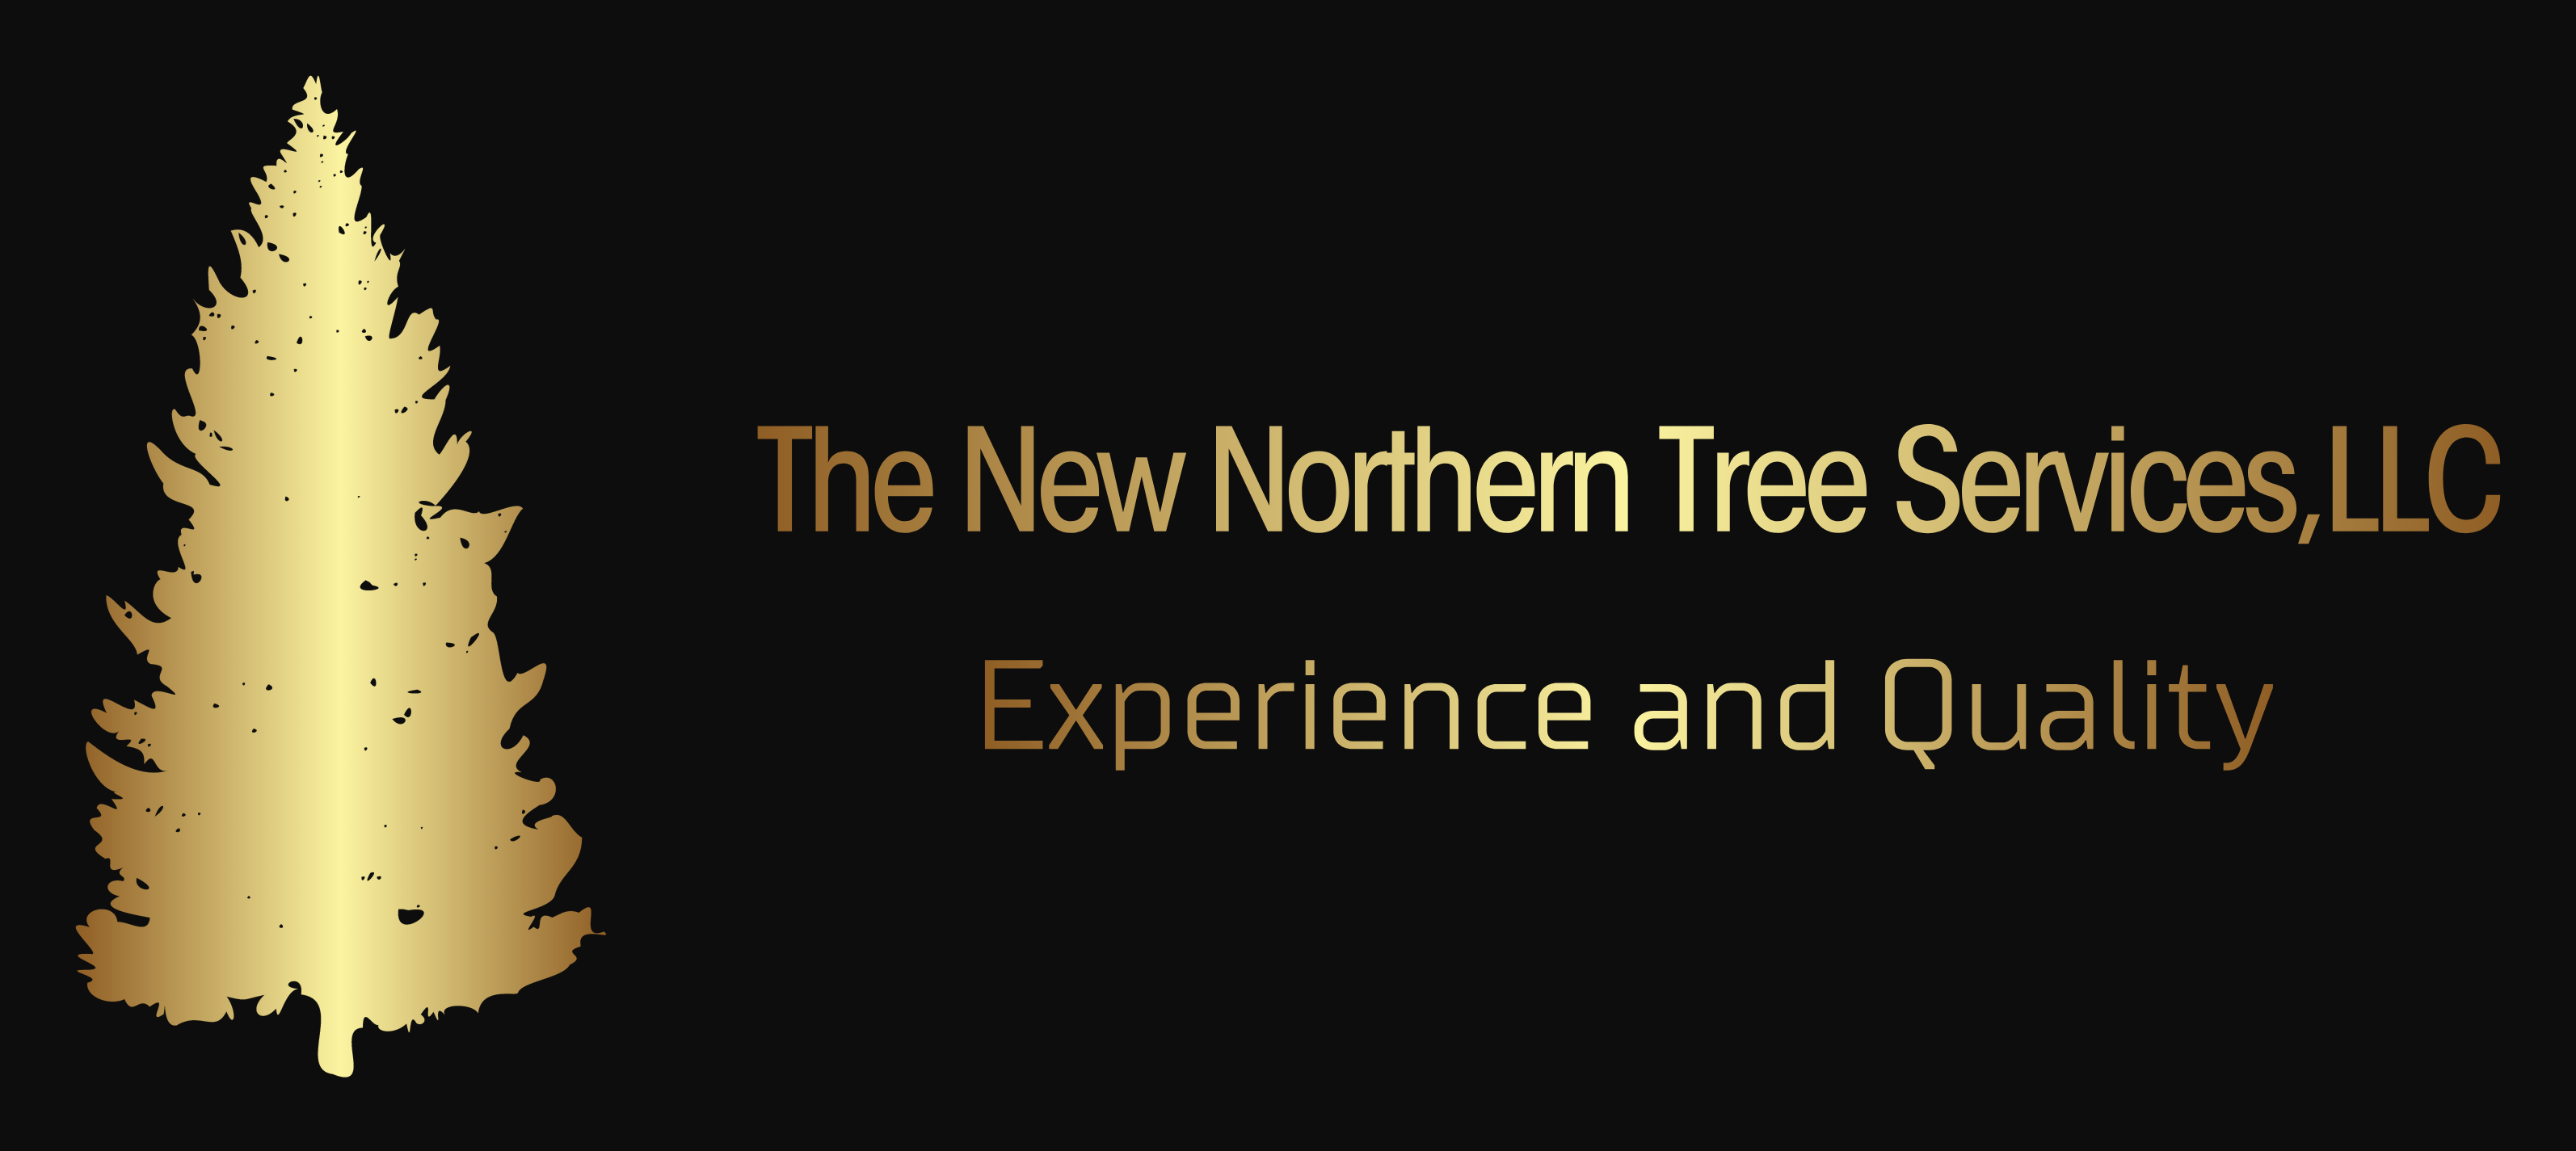 The New Northern Tree Services, LLC Logo